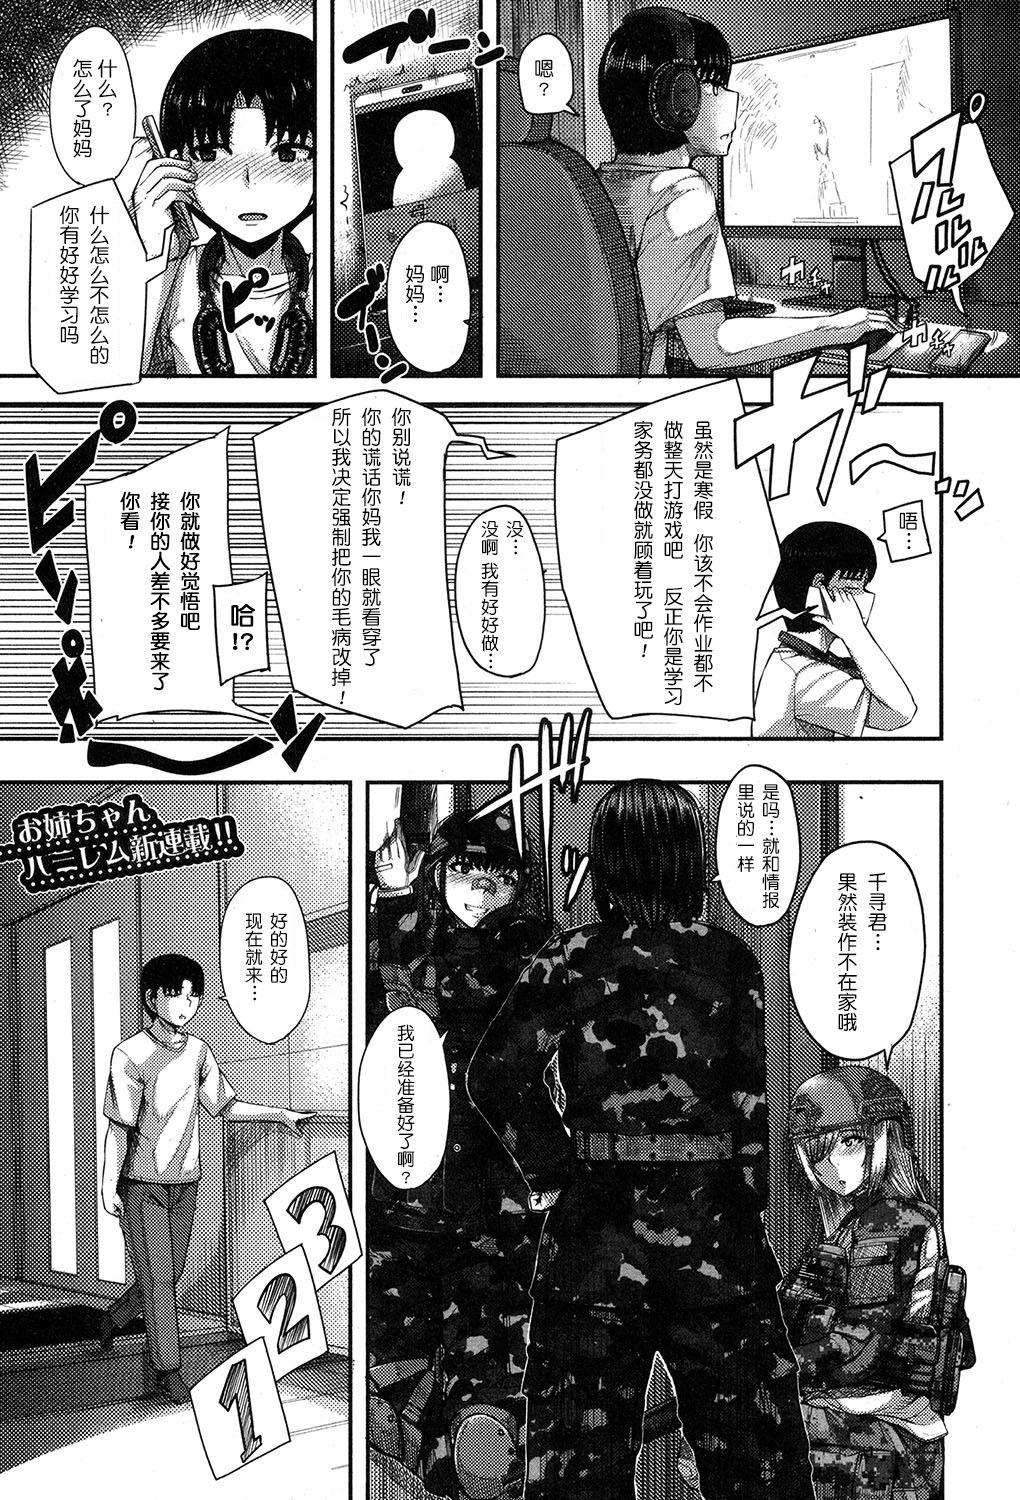 Dick Suck [Yutakame] Onee-chan Boot Camp ni Youkoso! Ch. 1-3 [Chinese] [鬼畜王汉化组] [Digital] Cop - Page 2